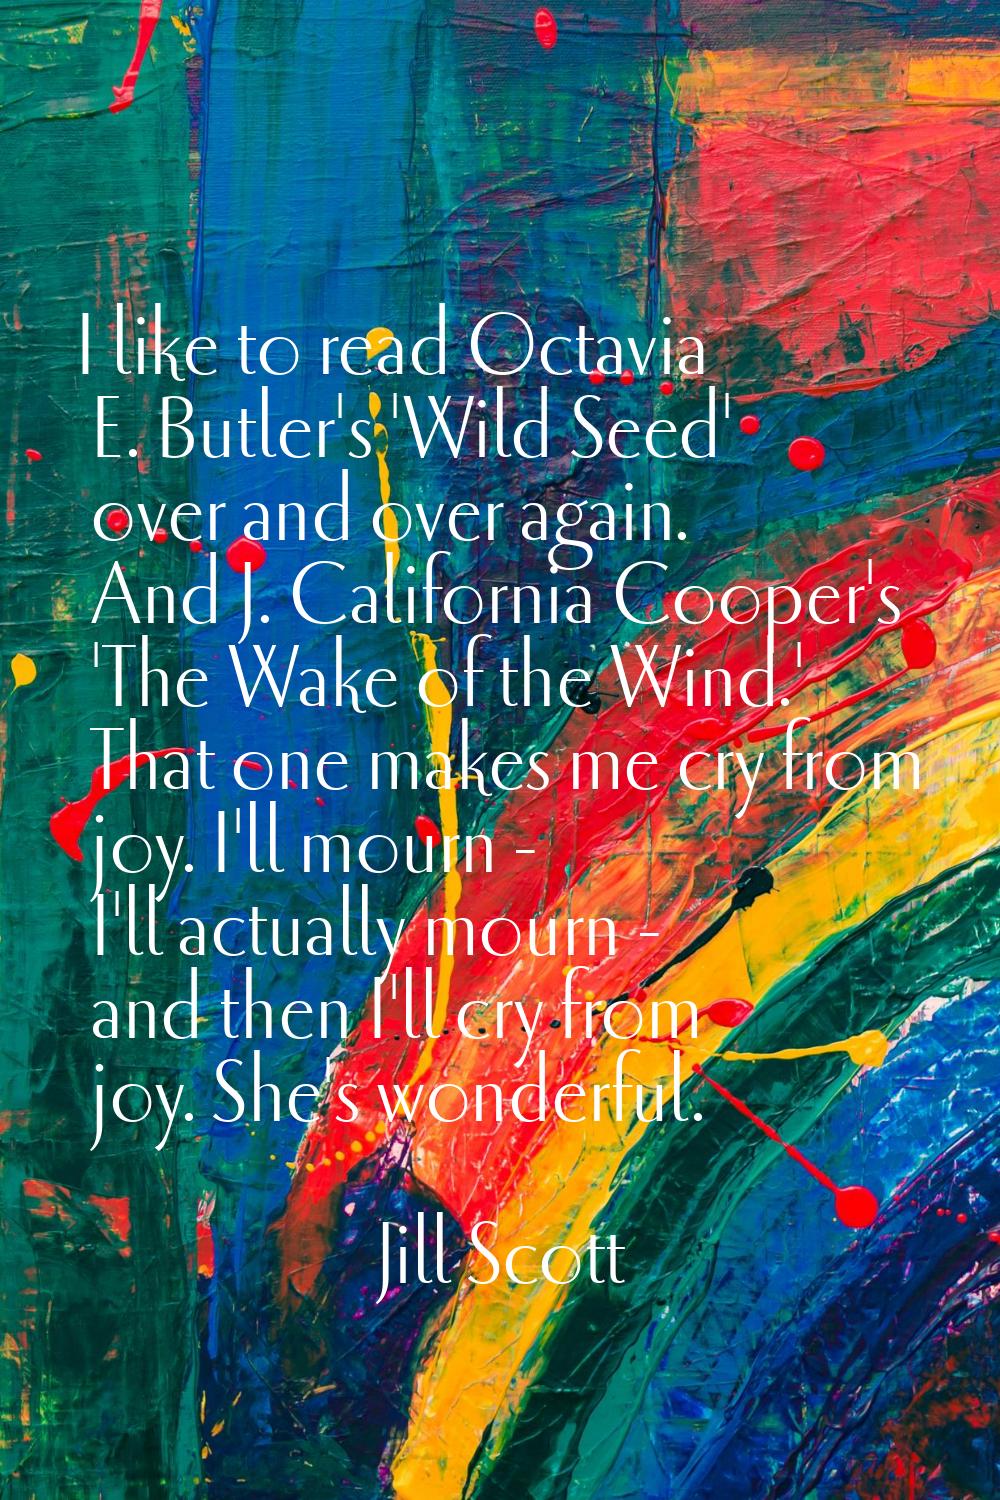 I like to read Octavia E. Butler's 'Wild Seed' over and over again. And J. California Cooper's 'The